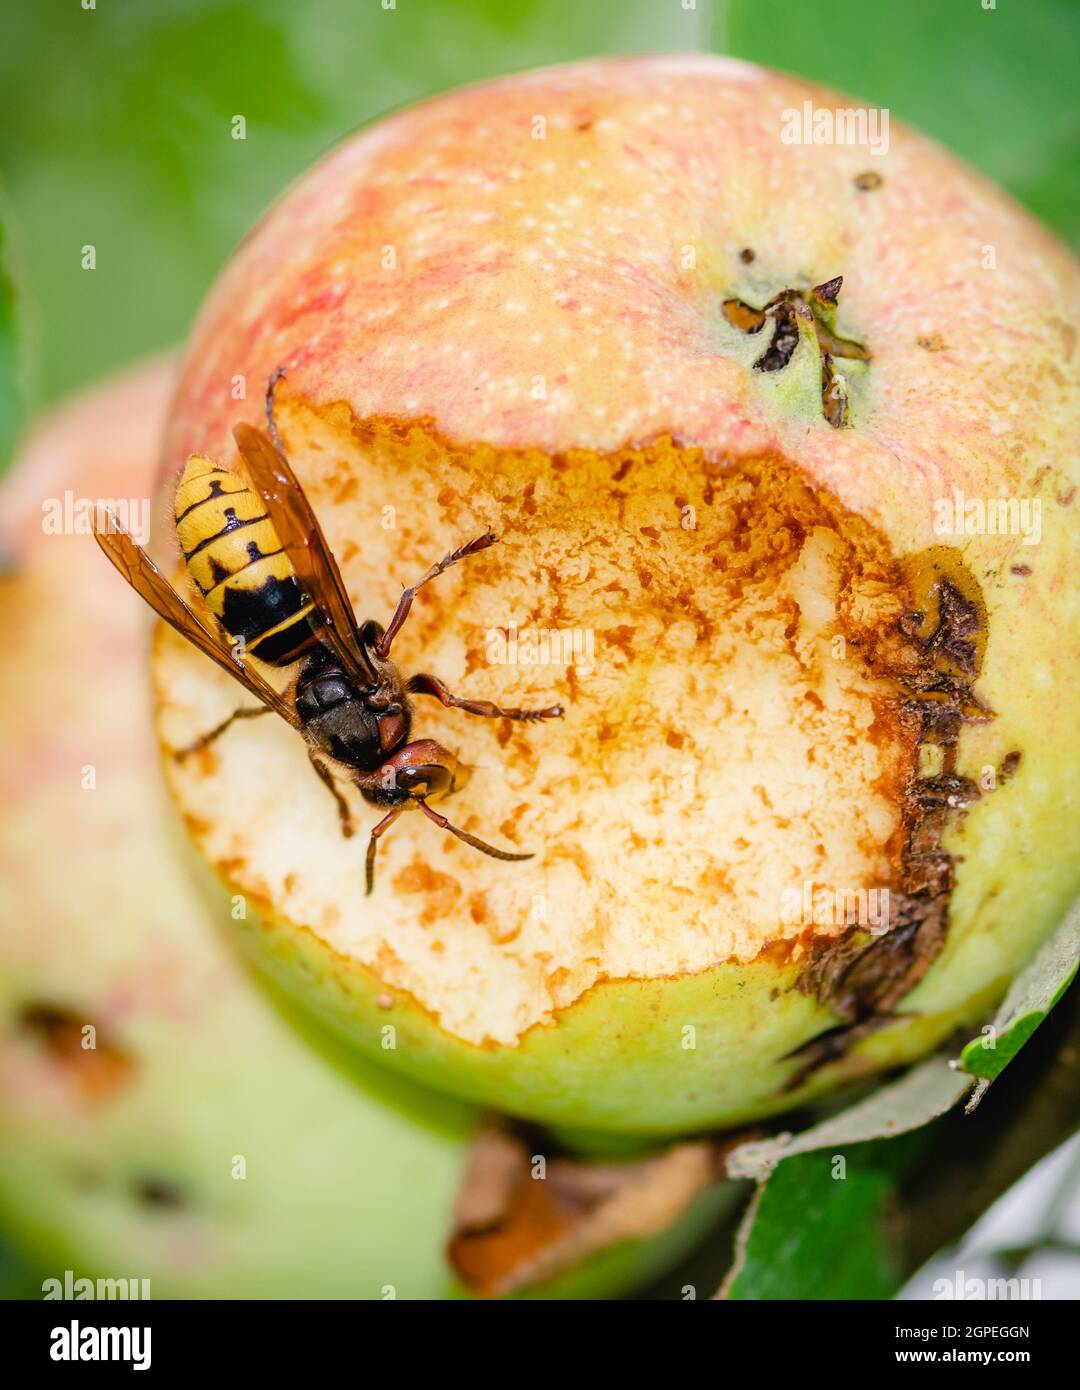 Giant European hornet wasp or Vespa crabro eating an apple hanging from a tree, close up, vertical Stock Photo